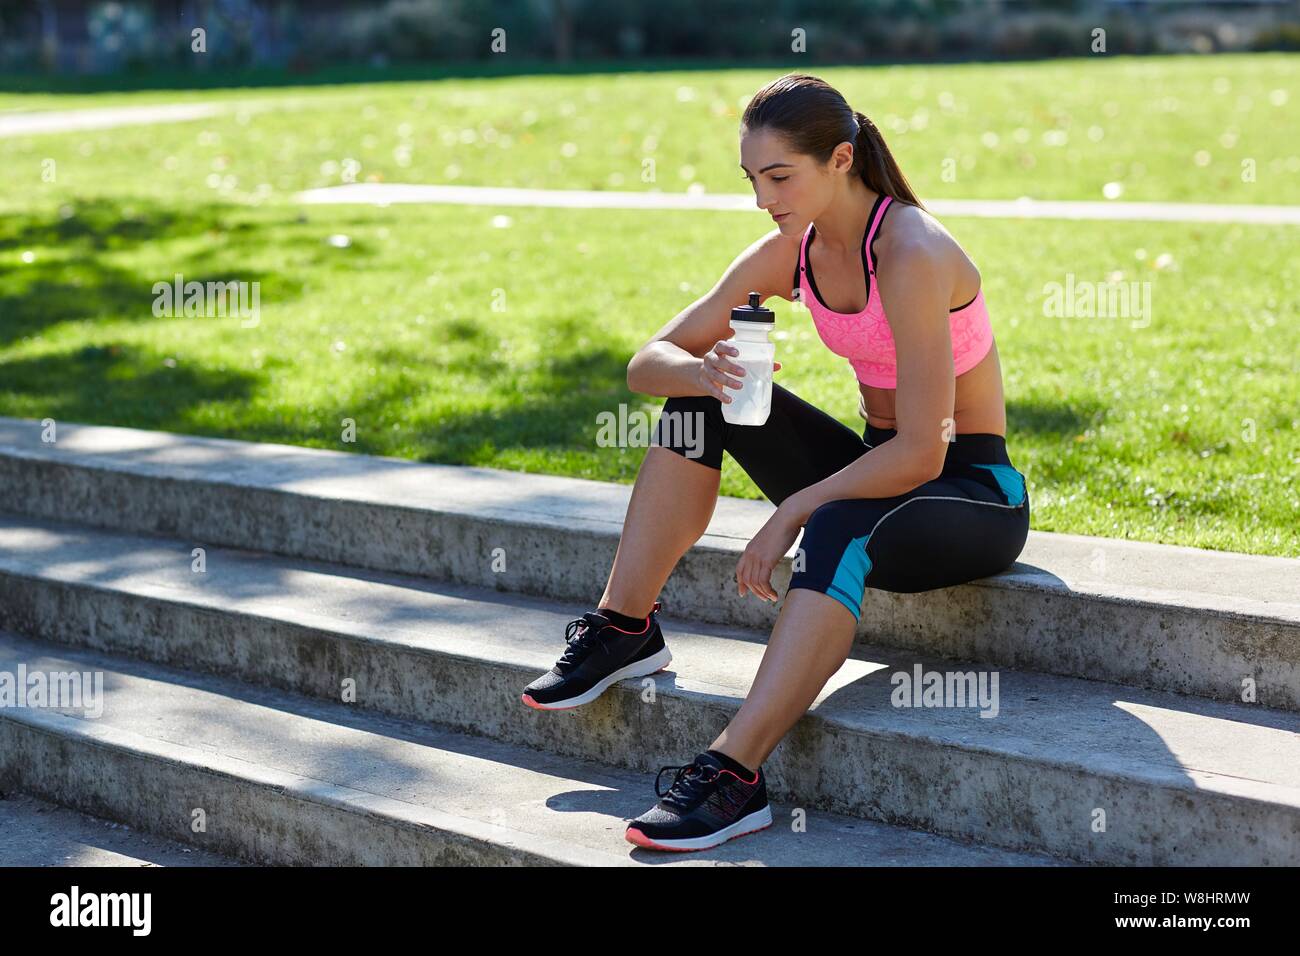 Young woman in sports clothing resting on steps with water bottle. Stock Photo